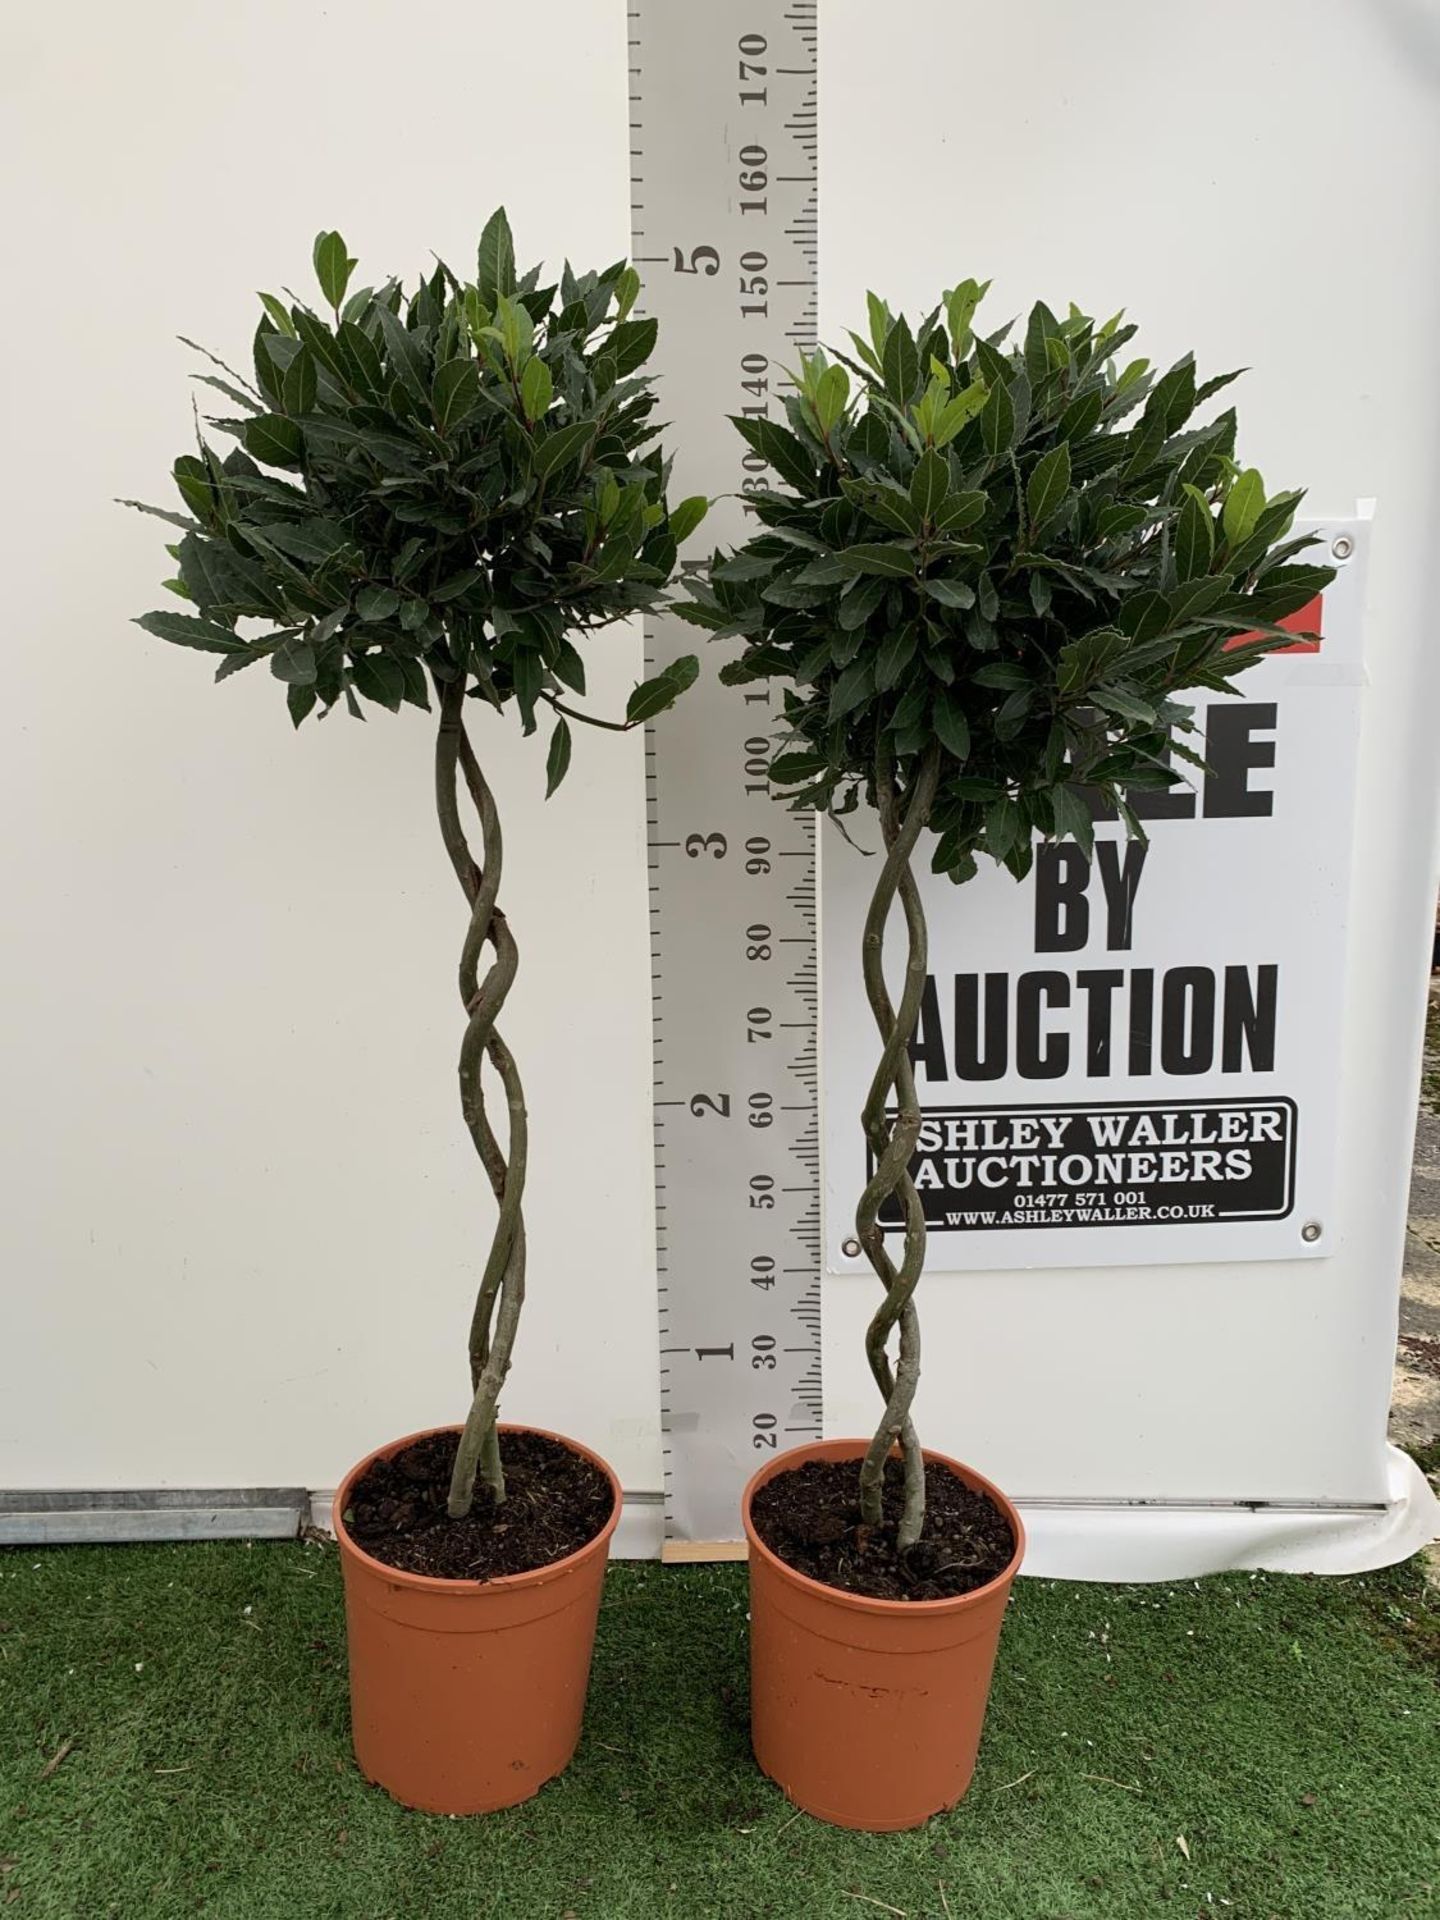 TWO DOUBLE SPIRAL LAURUS BAY TREES APPROX 150CM IN HEIGHT IN 7.5 LTR POTS PLUS VAT TO BE SOLD FOR